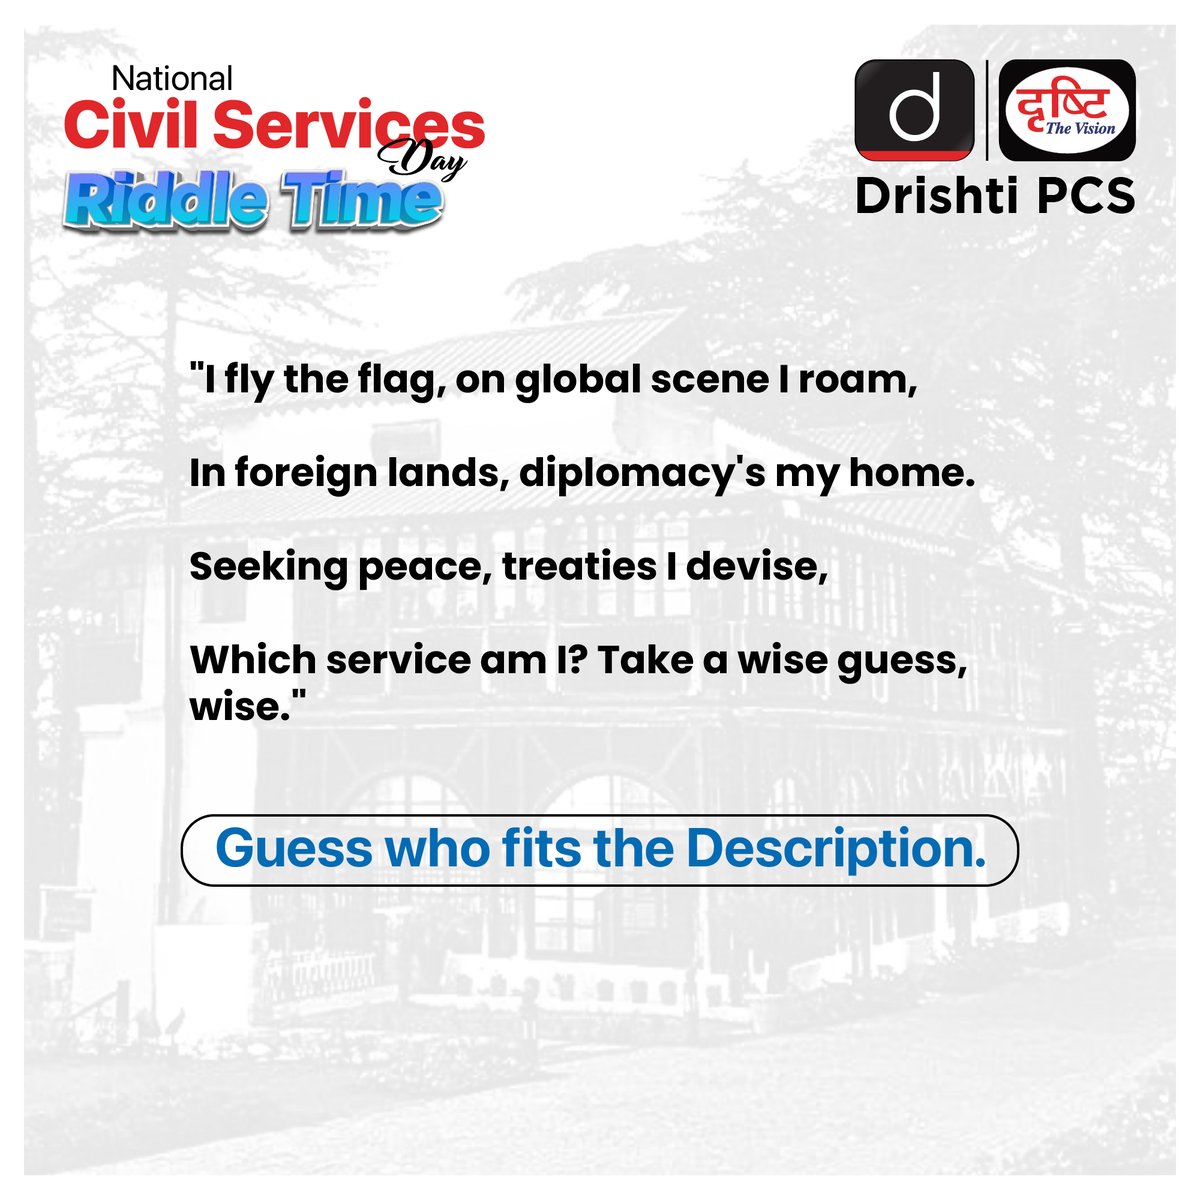 It's the challenge of National Civil Service Day's riddle, so step up and take a guess!

#CivilServicesDay #Riddle #National #ServiceDay #JaiHind #UPSC #SardarVallabhBhaiPatel #PublicServices #SteelFrameOfIndia #LBSNAA #UPSC2024 #IAS #IPS #India #DrishtiIAS